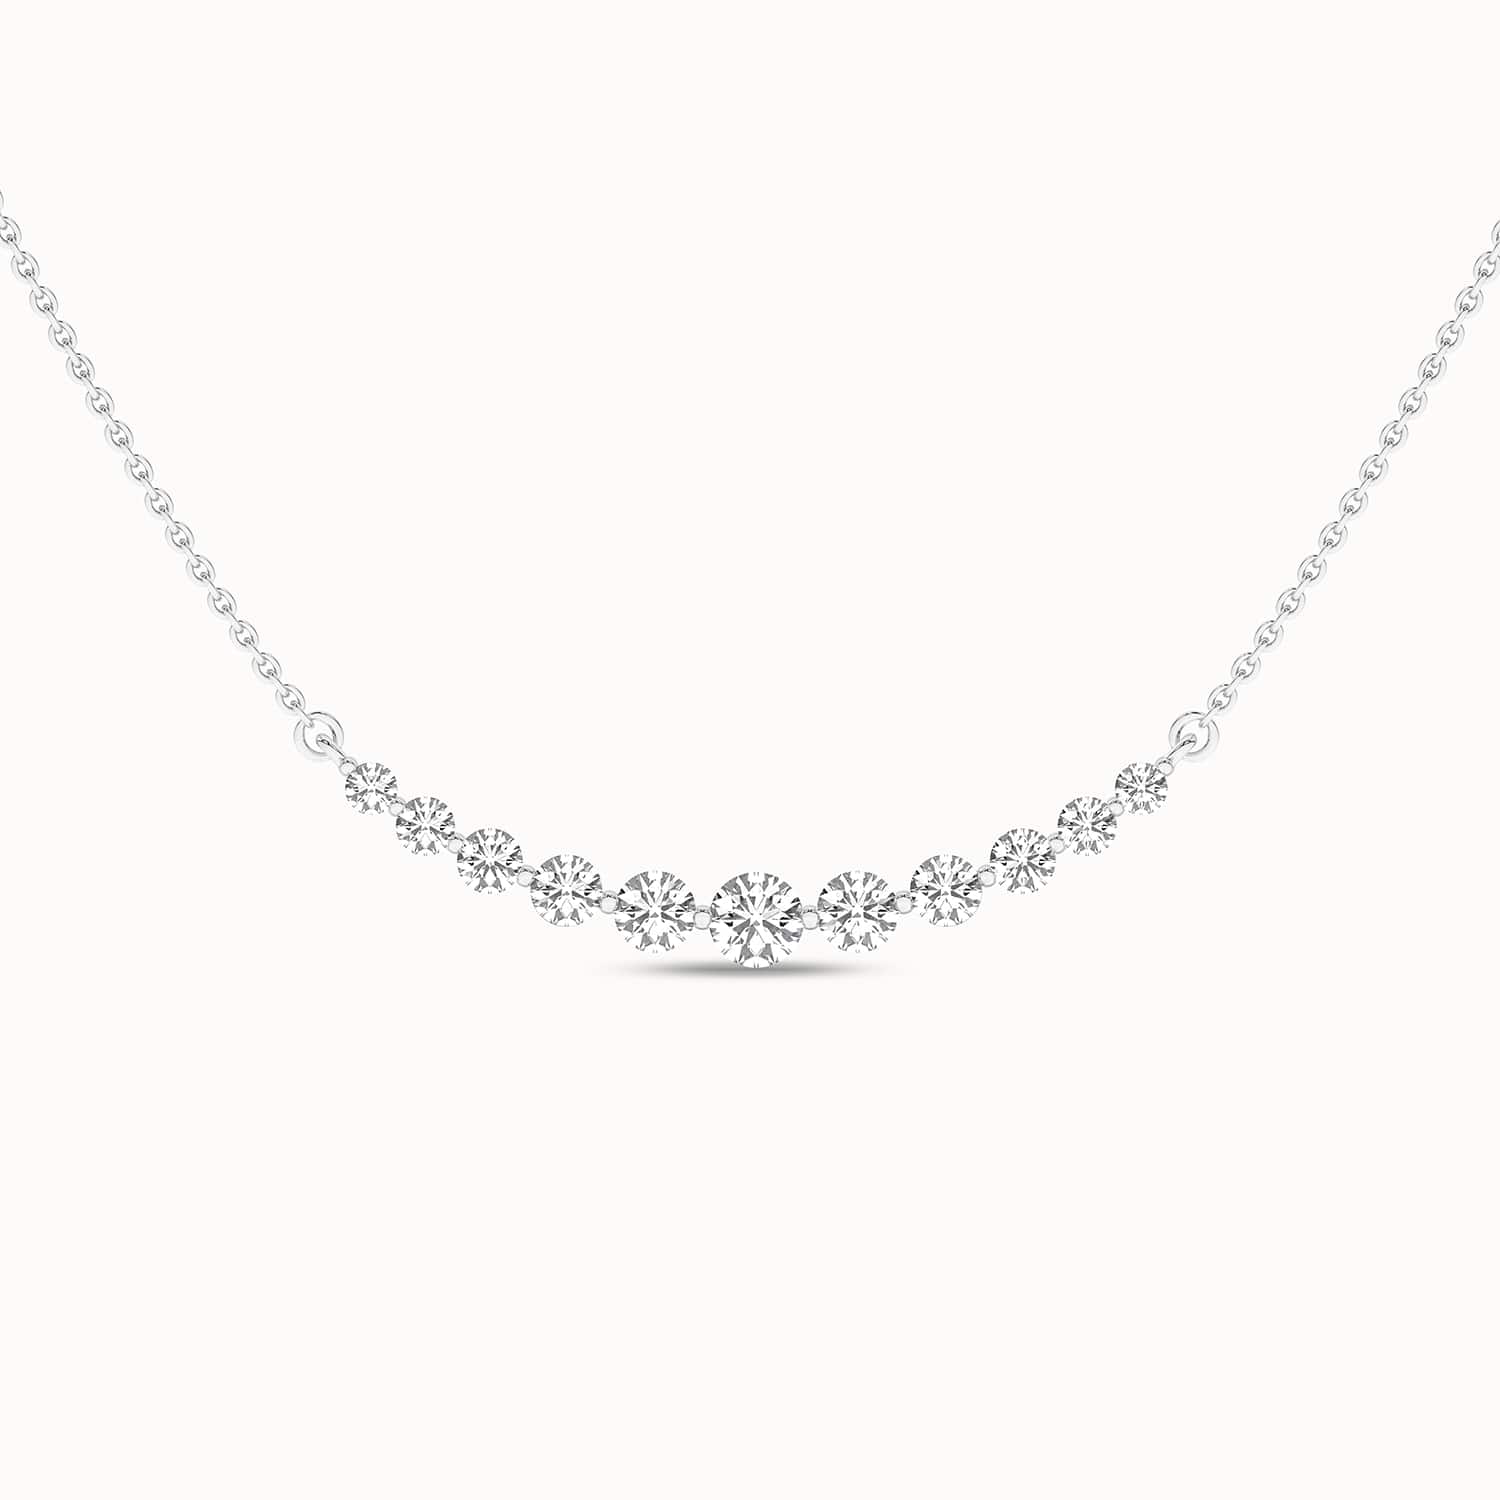 Captivating Necklace_Product Angle_1/2Ct. - 4